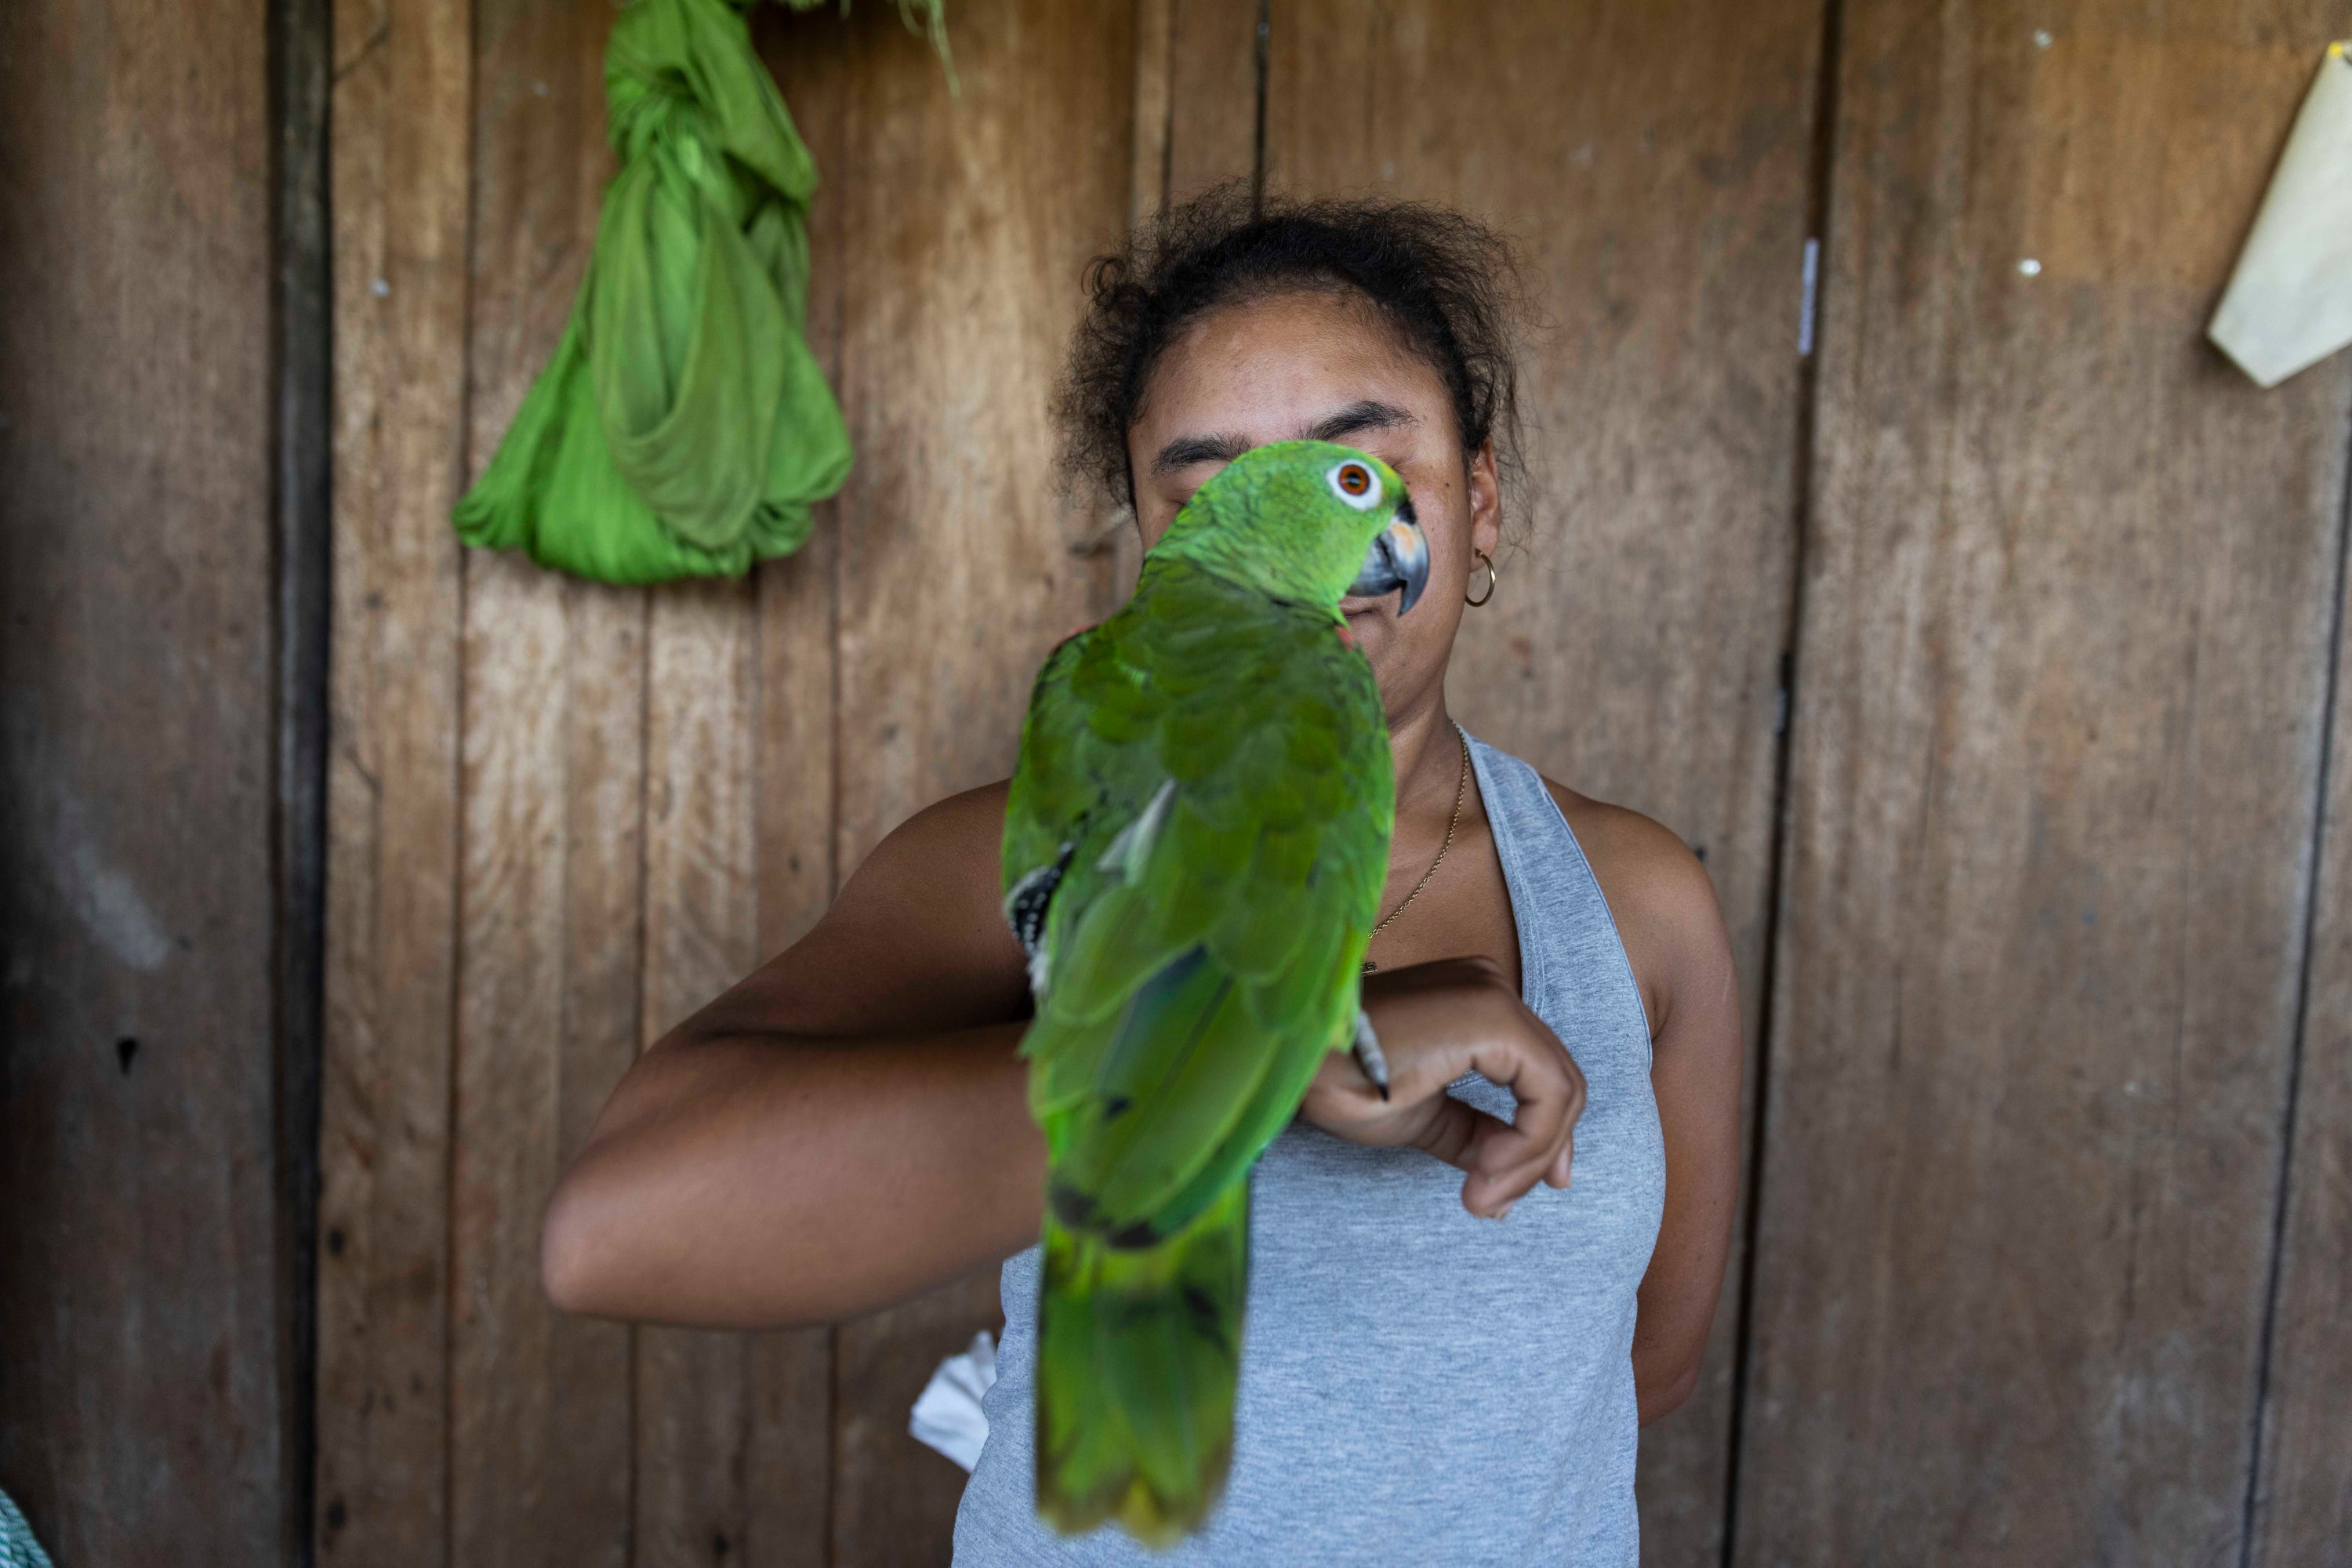 Margie Palacio, secretary of the board of Morichal, a community near Montebello, holds a parrot on her arm